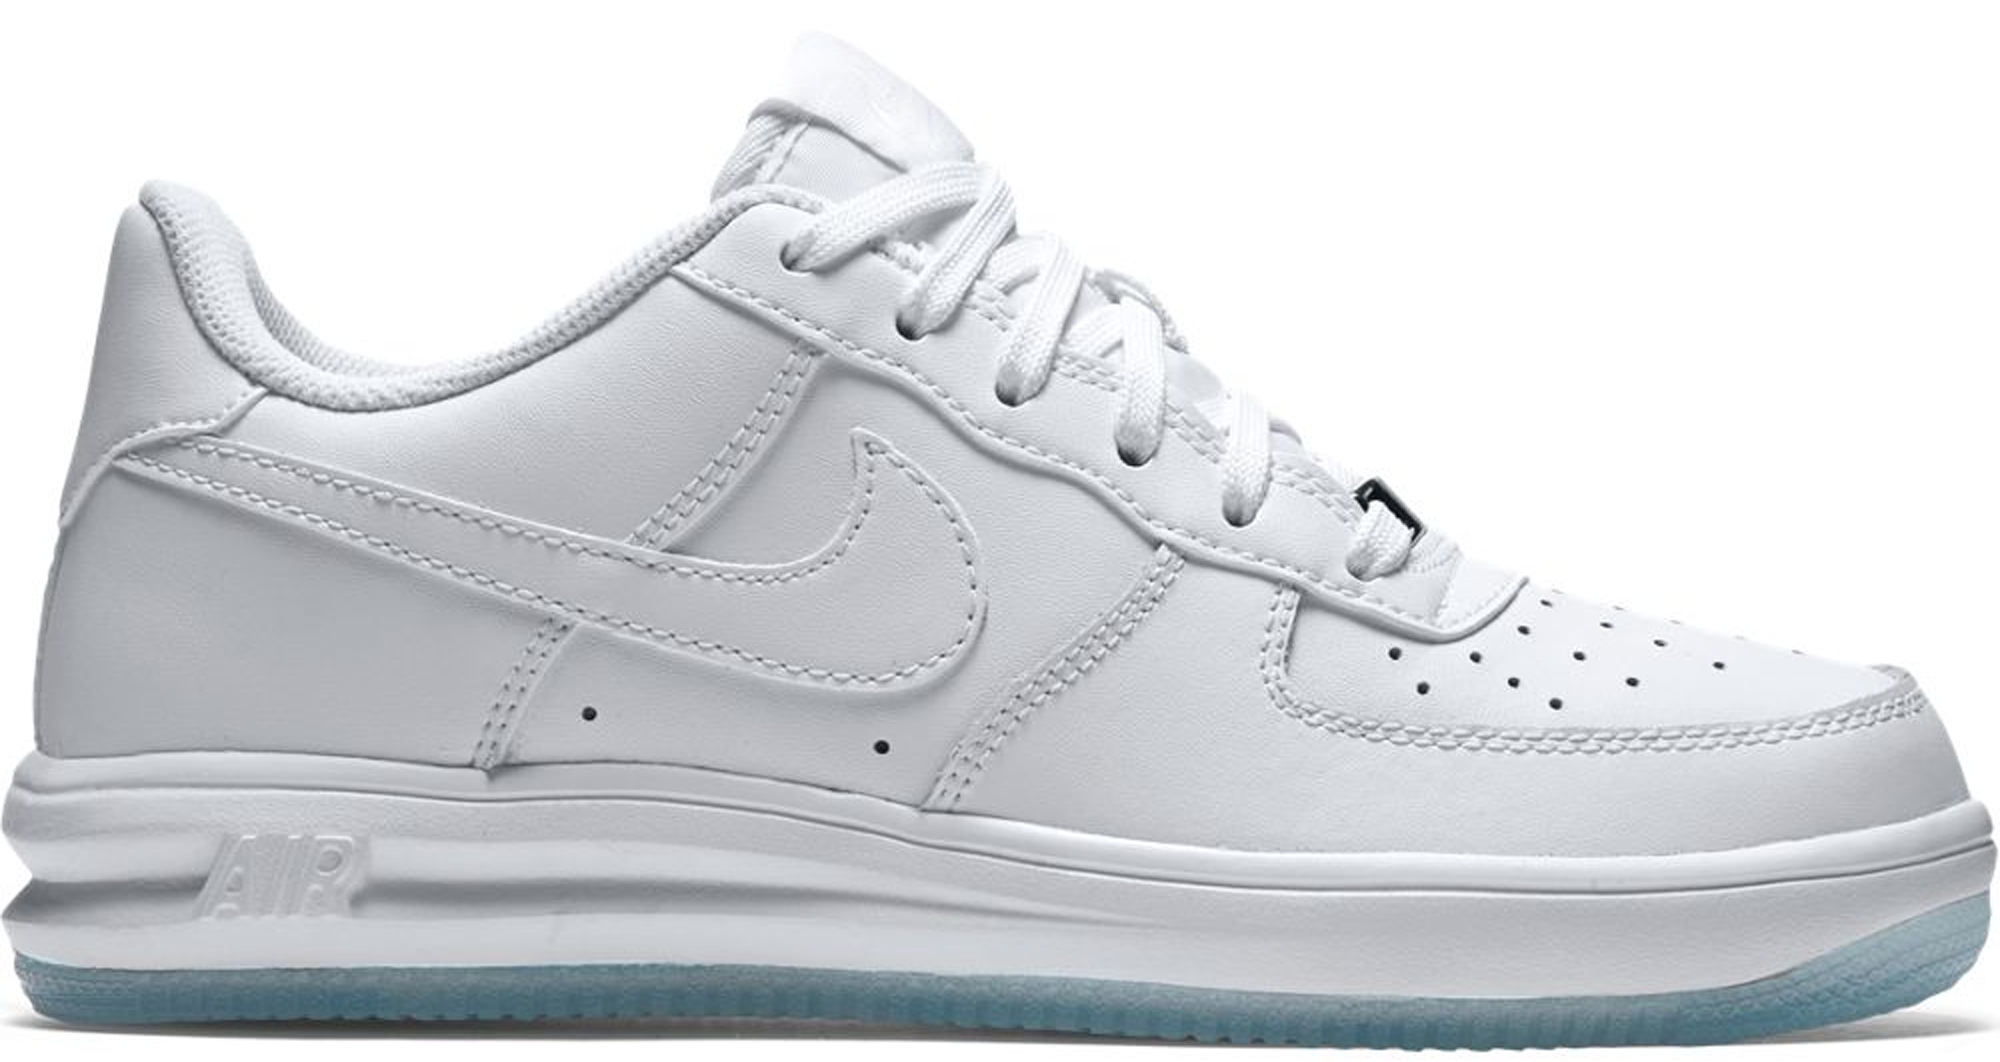 Nike Lunar Force 1 Low White Ice (GS 